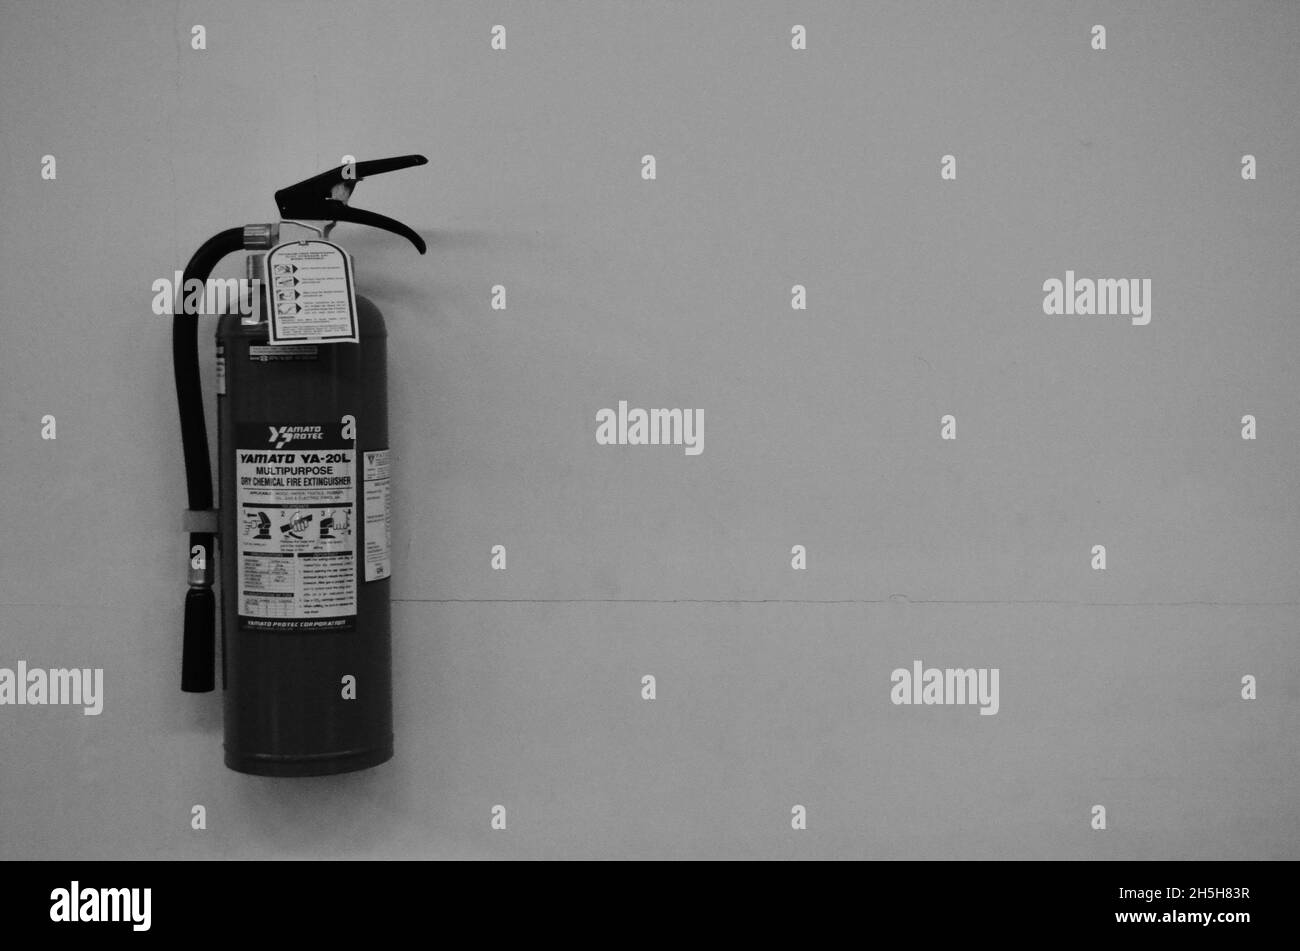 emergency fire extinguisher in black and white photo Stock Photo